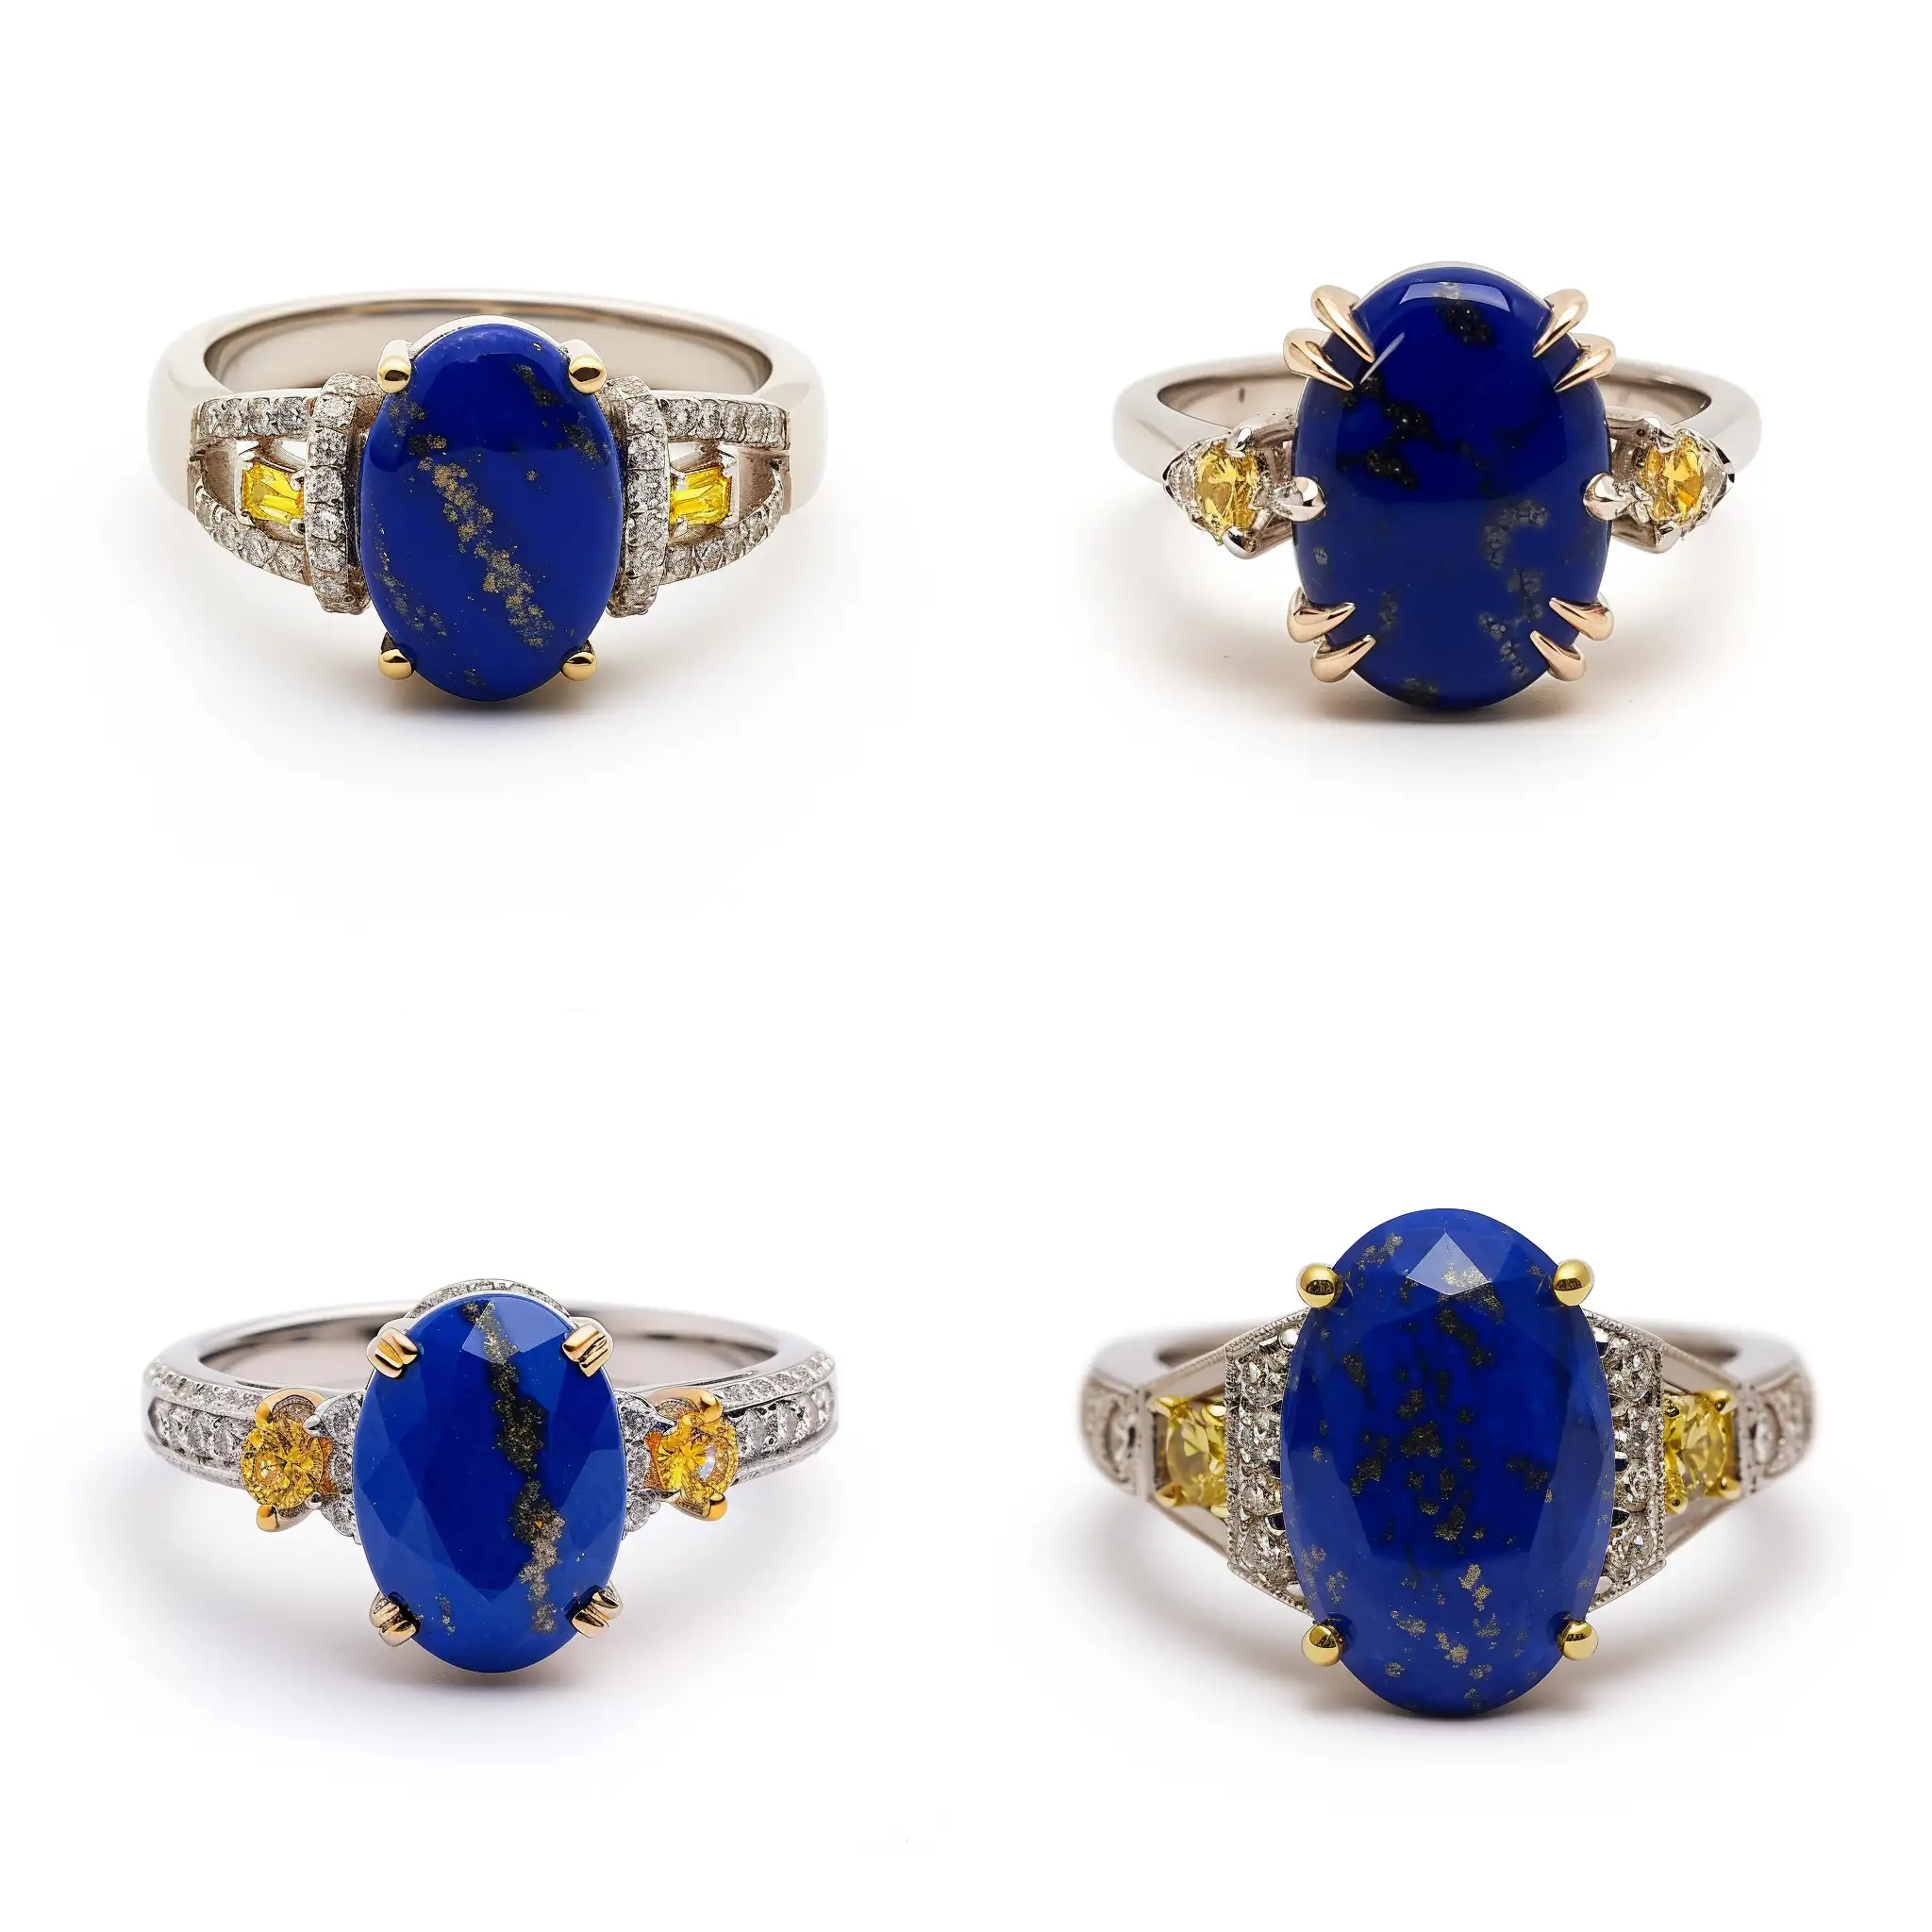 /imagine prompt white gold ring with ovale cut lapis lazuli 2cm long and 1.5 cm wide and yellow diamonds on each side art deco style set